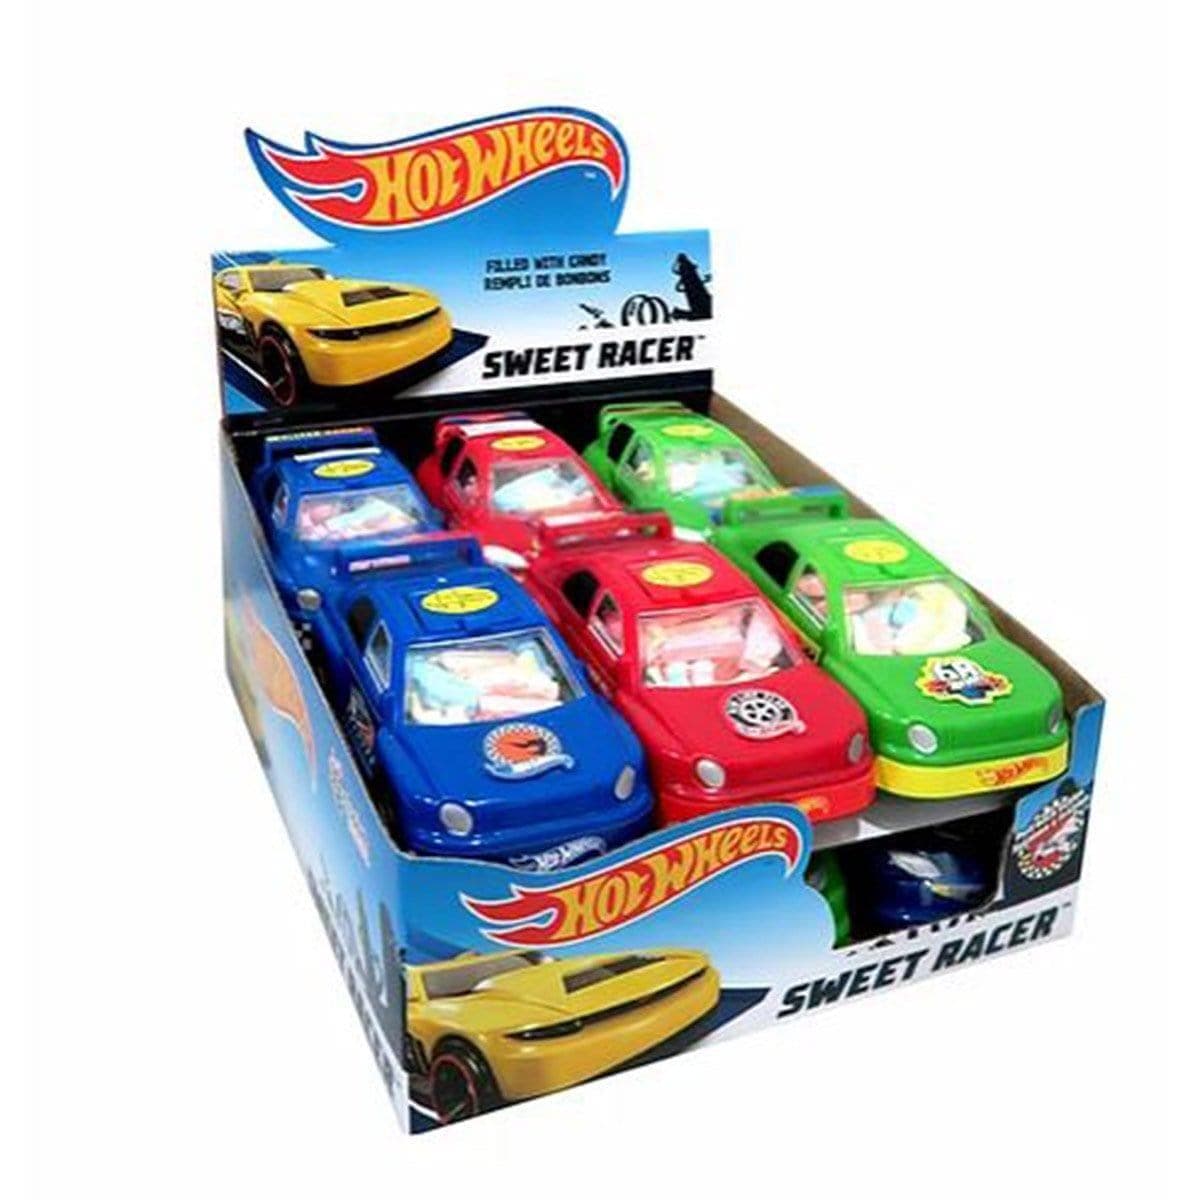 Buy Candy Hot Wheels Sweet Racer, Assortment, 1 Count sold at Party Expert